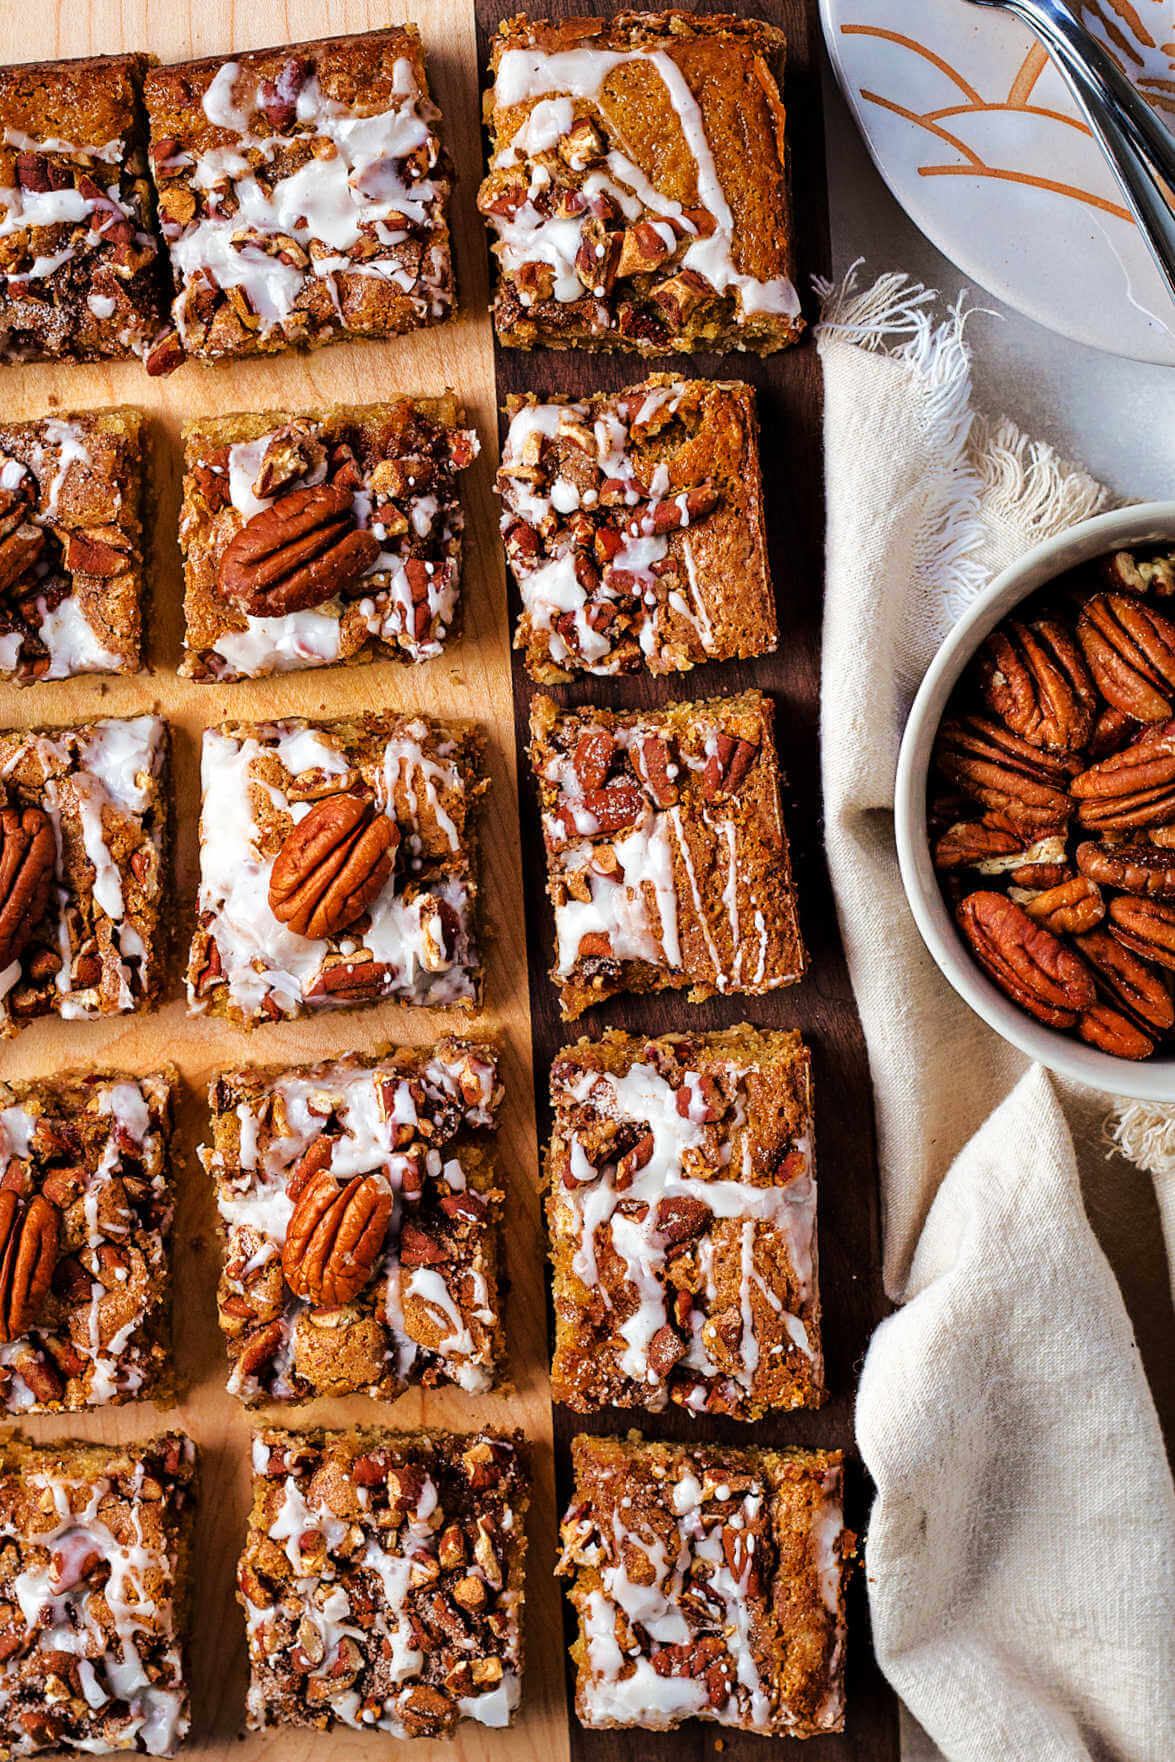 coffee cake cut into squares on a wooden board with a bowl of pecans on a table.